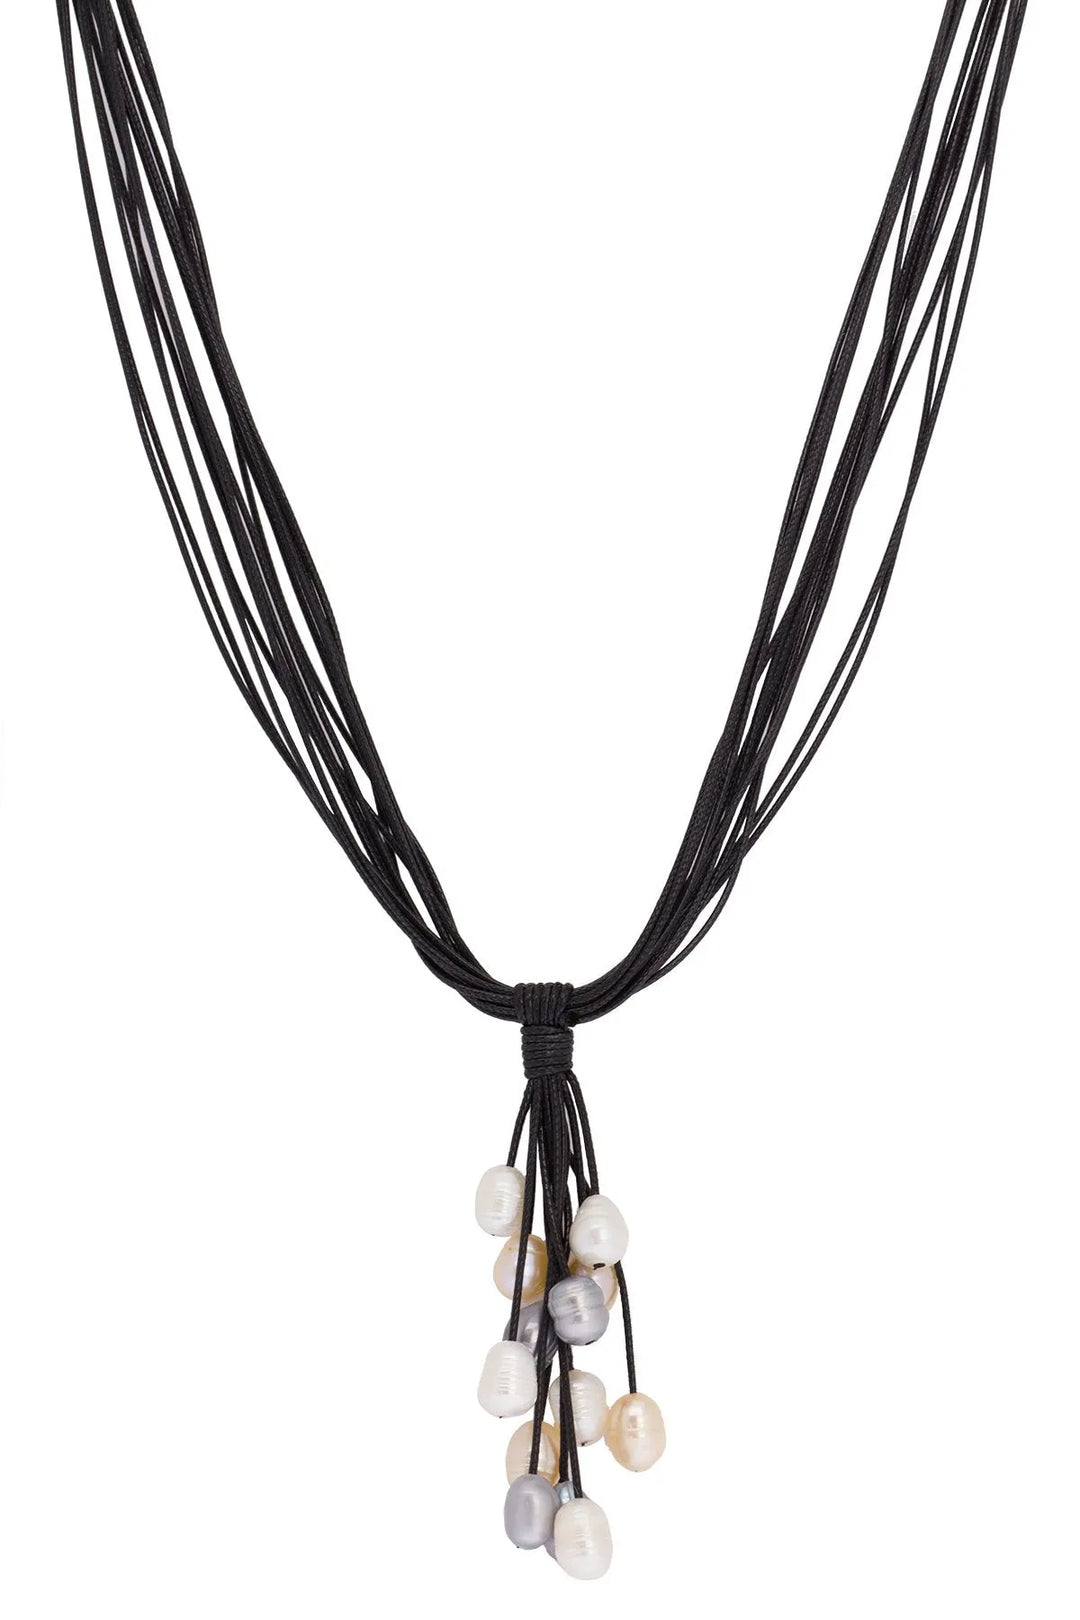 Tahitian Wax Corded Pearl Necklace Black